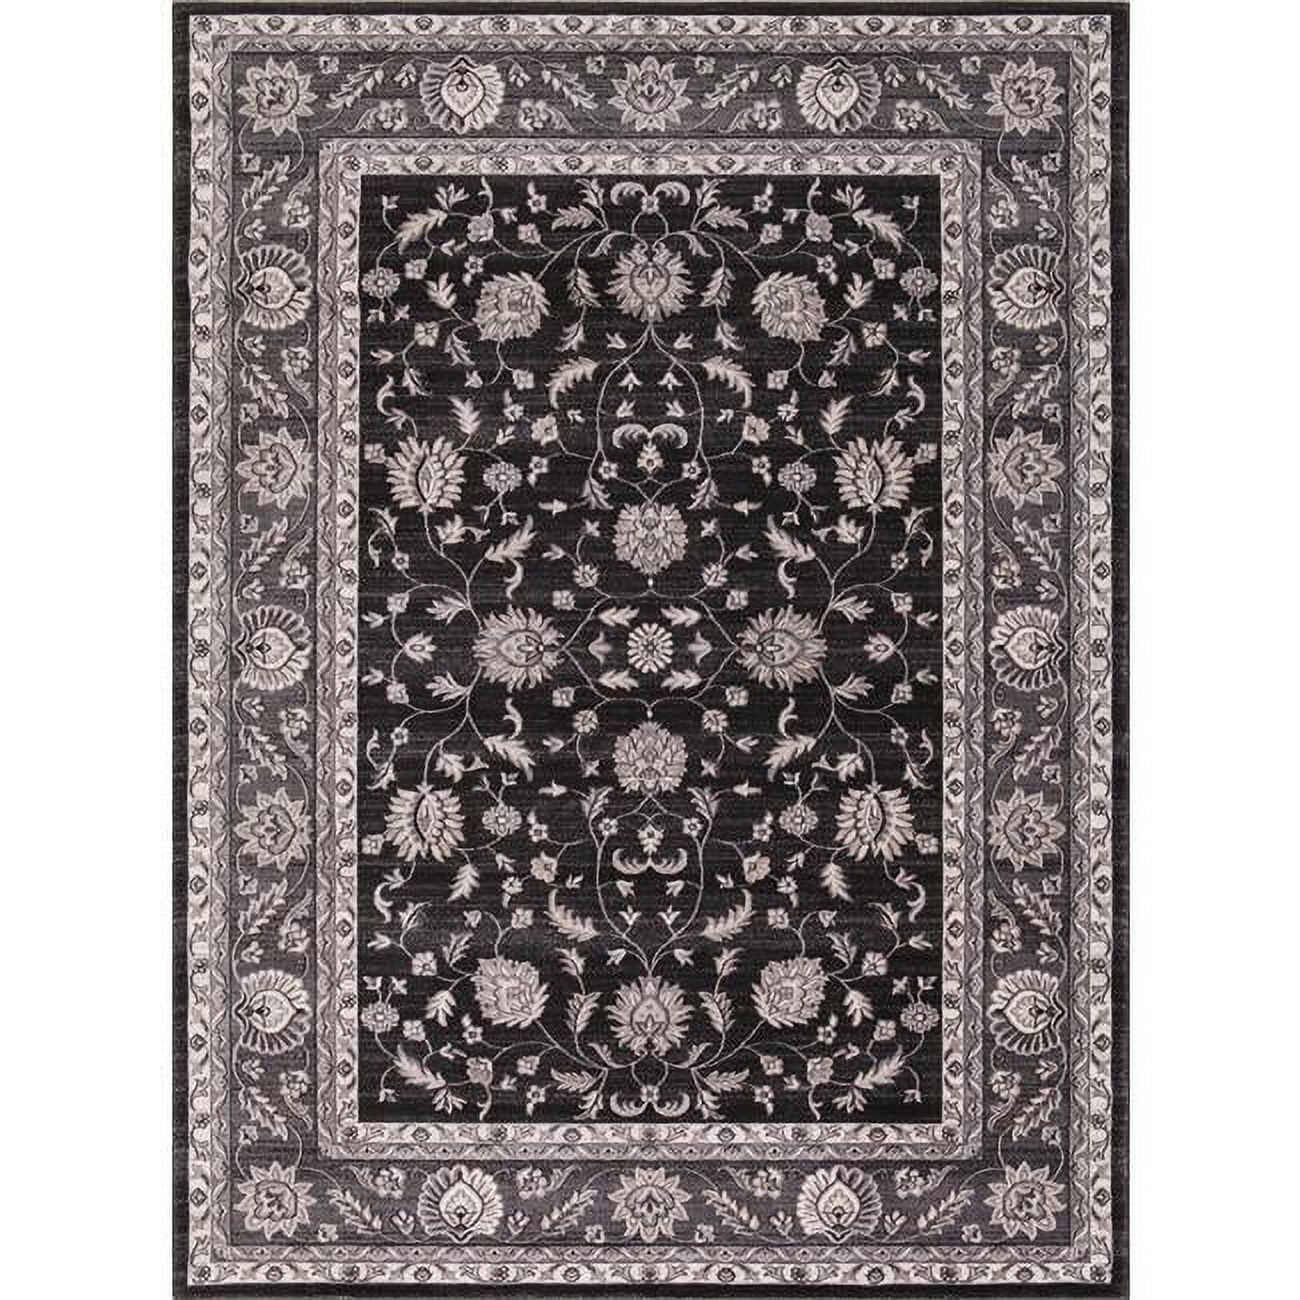 Concord Global 28237 7 Ft. 10 In. X 9 Ft. 10 In. Kashan Mahal - Anthracite